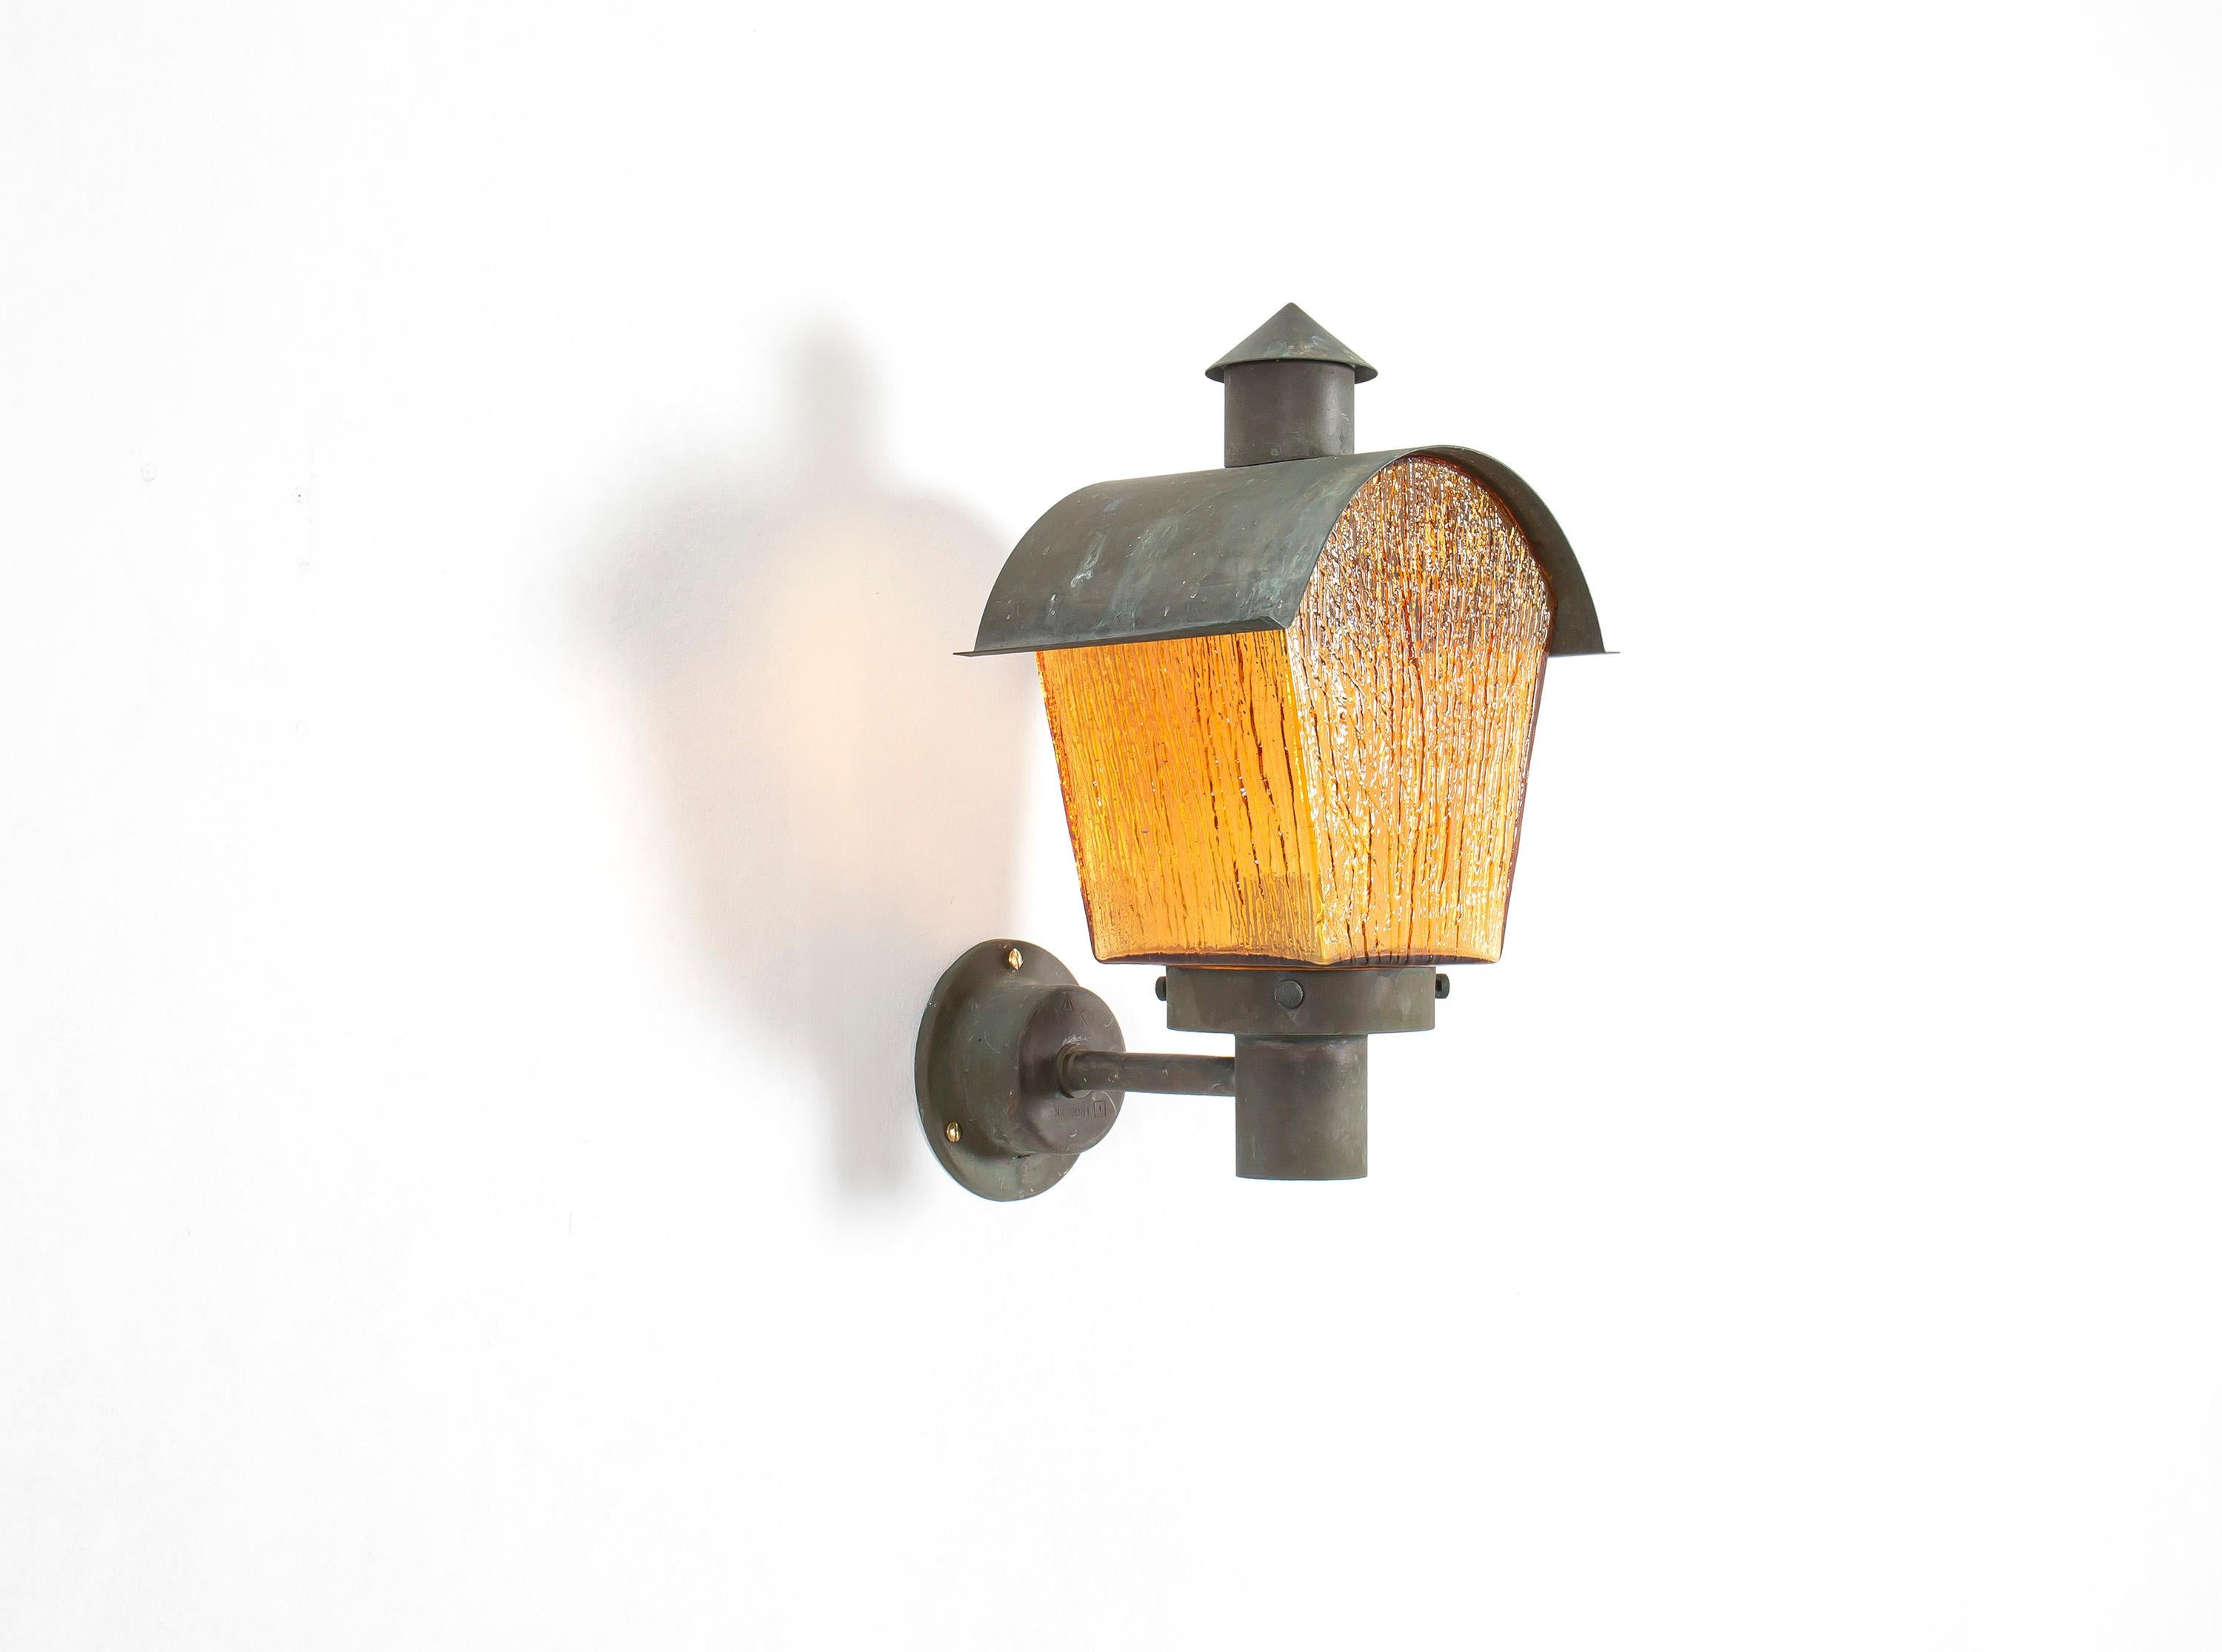 Wonderful and decorative wall light in patinated copper and glass. Designed and made in Norway from circa the 1970s first half. The lamp is fully working and in good vintage condition. The lamp is fitted with one E27 bulb holder (works in the US)